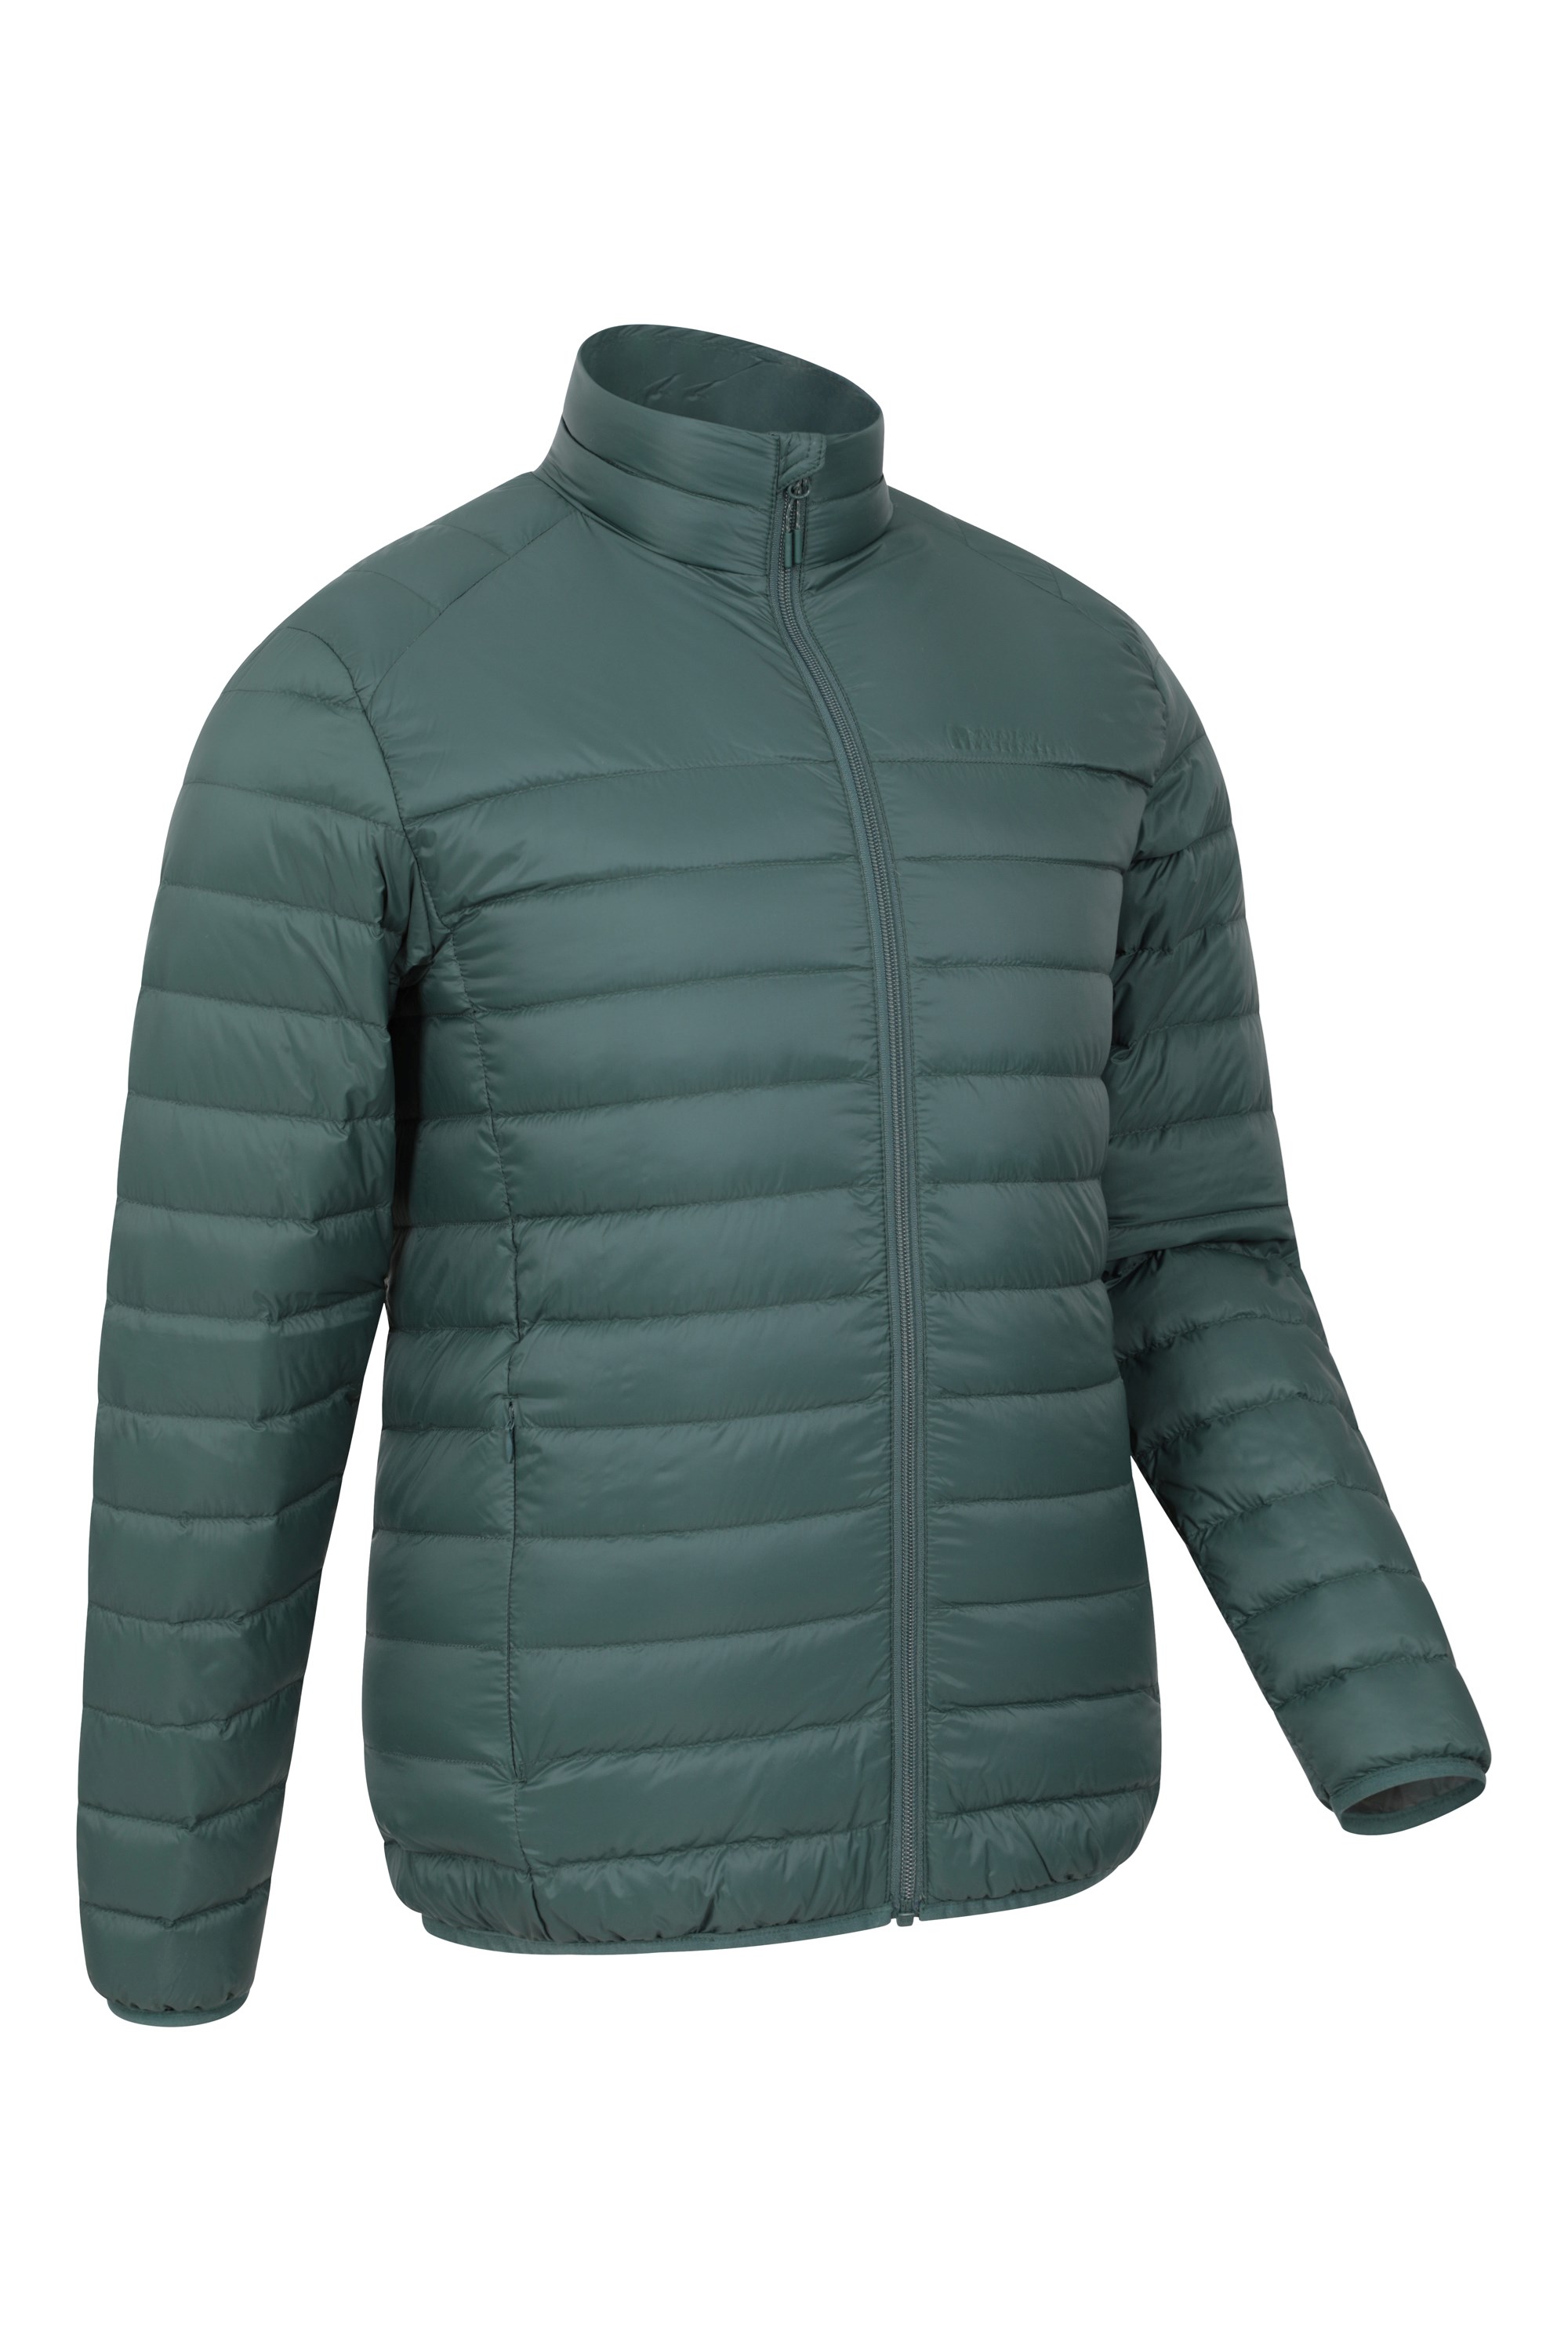 Mountain Warehouse Featherweight Mens Down Jacket Water Resistant 